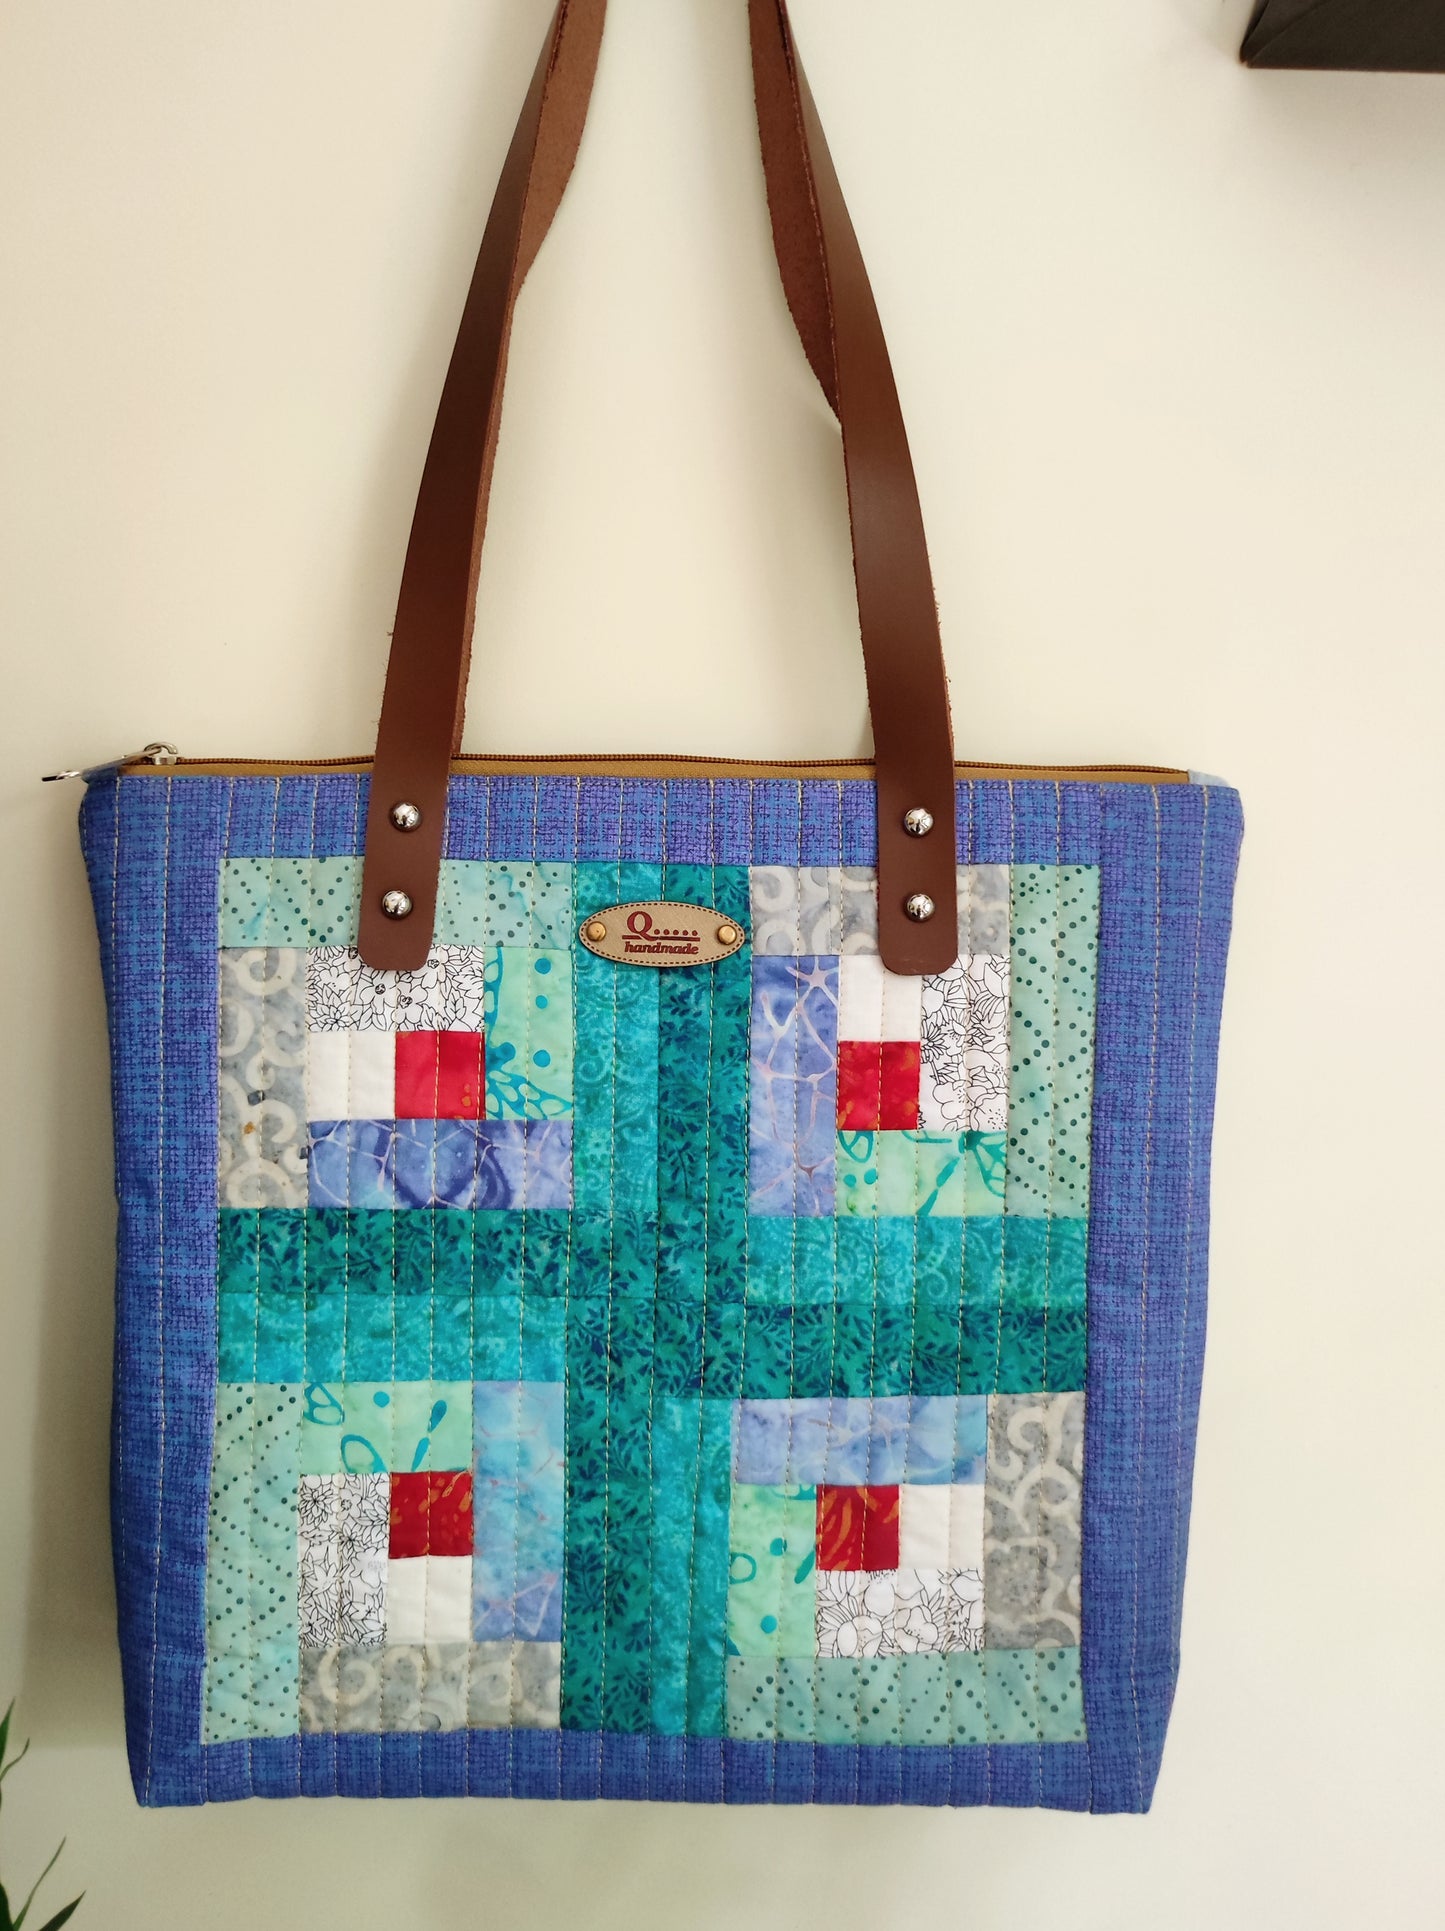 Handmade Quilted Patchwork Tote Bag with Genuine Leather Handles